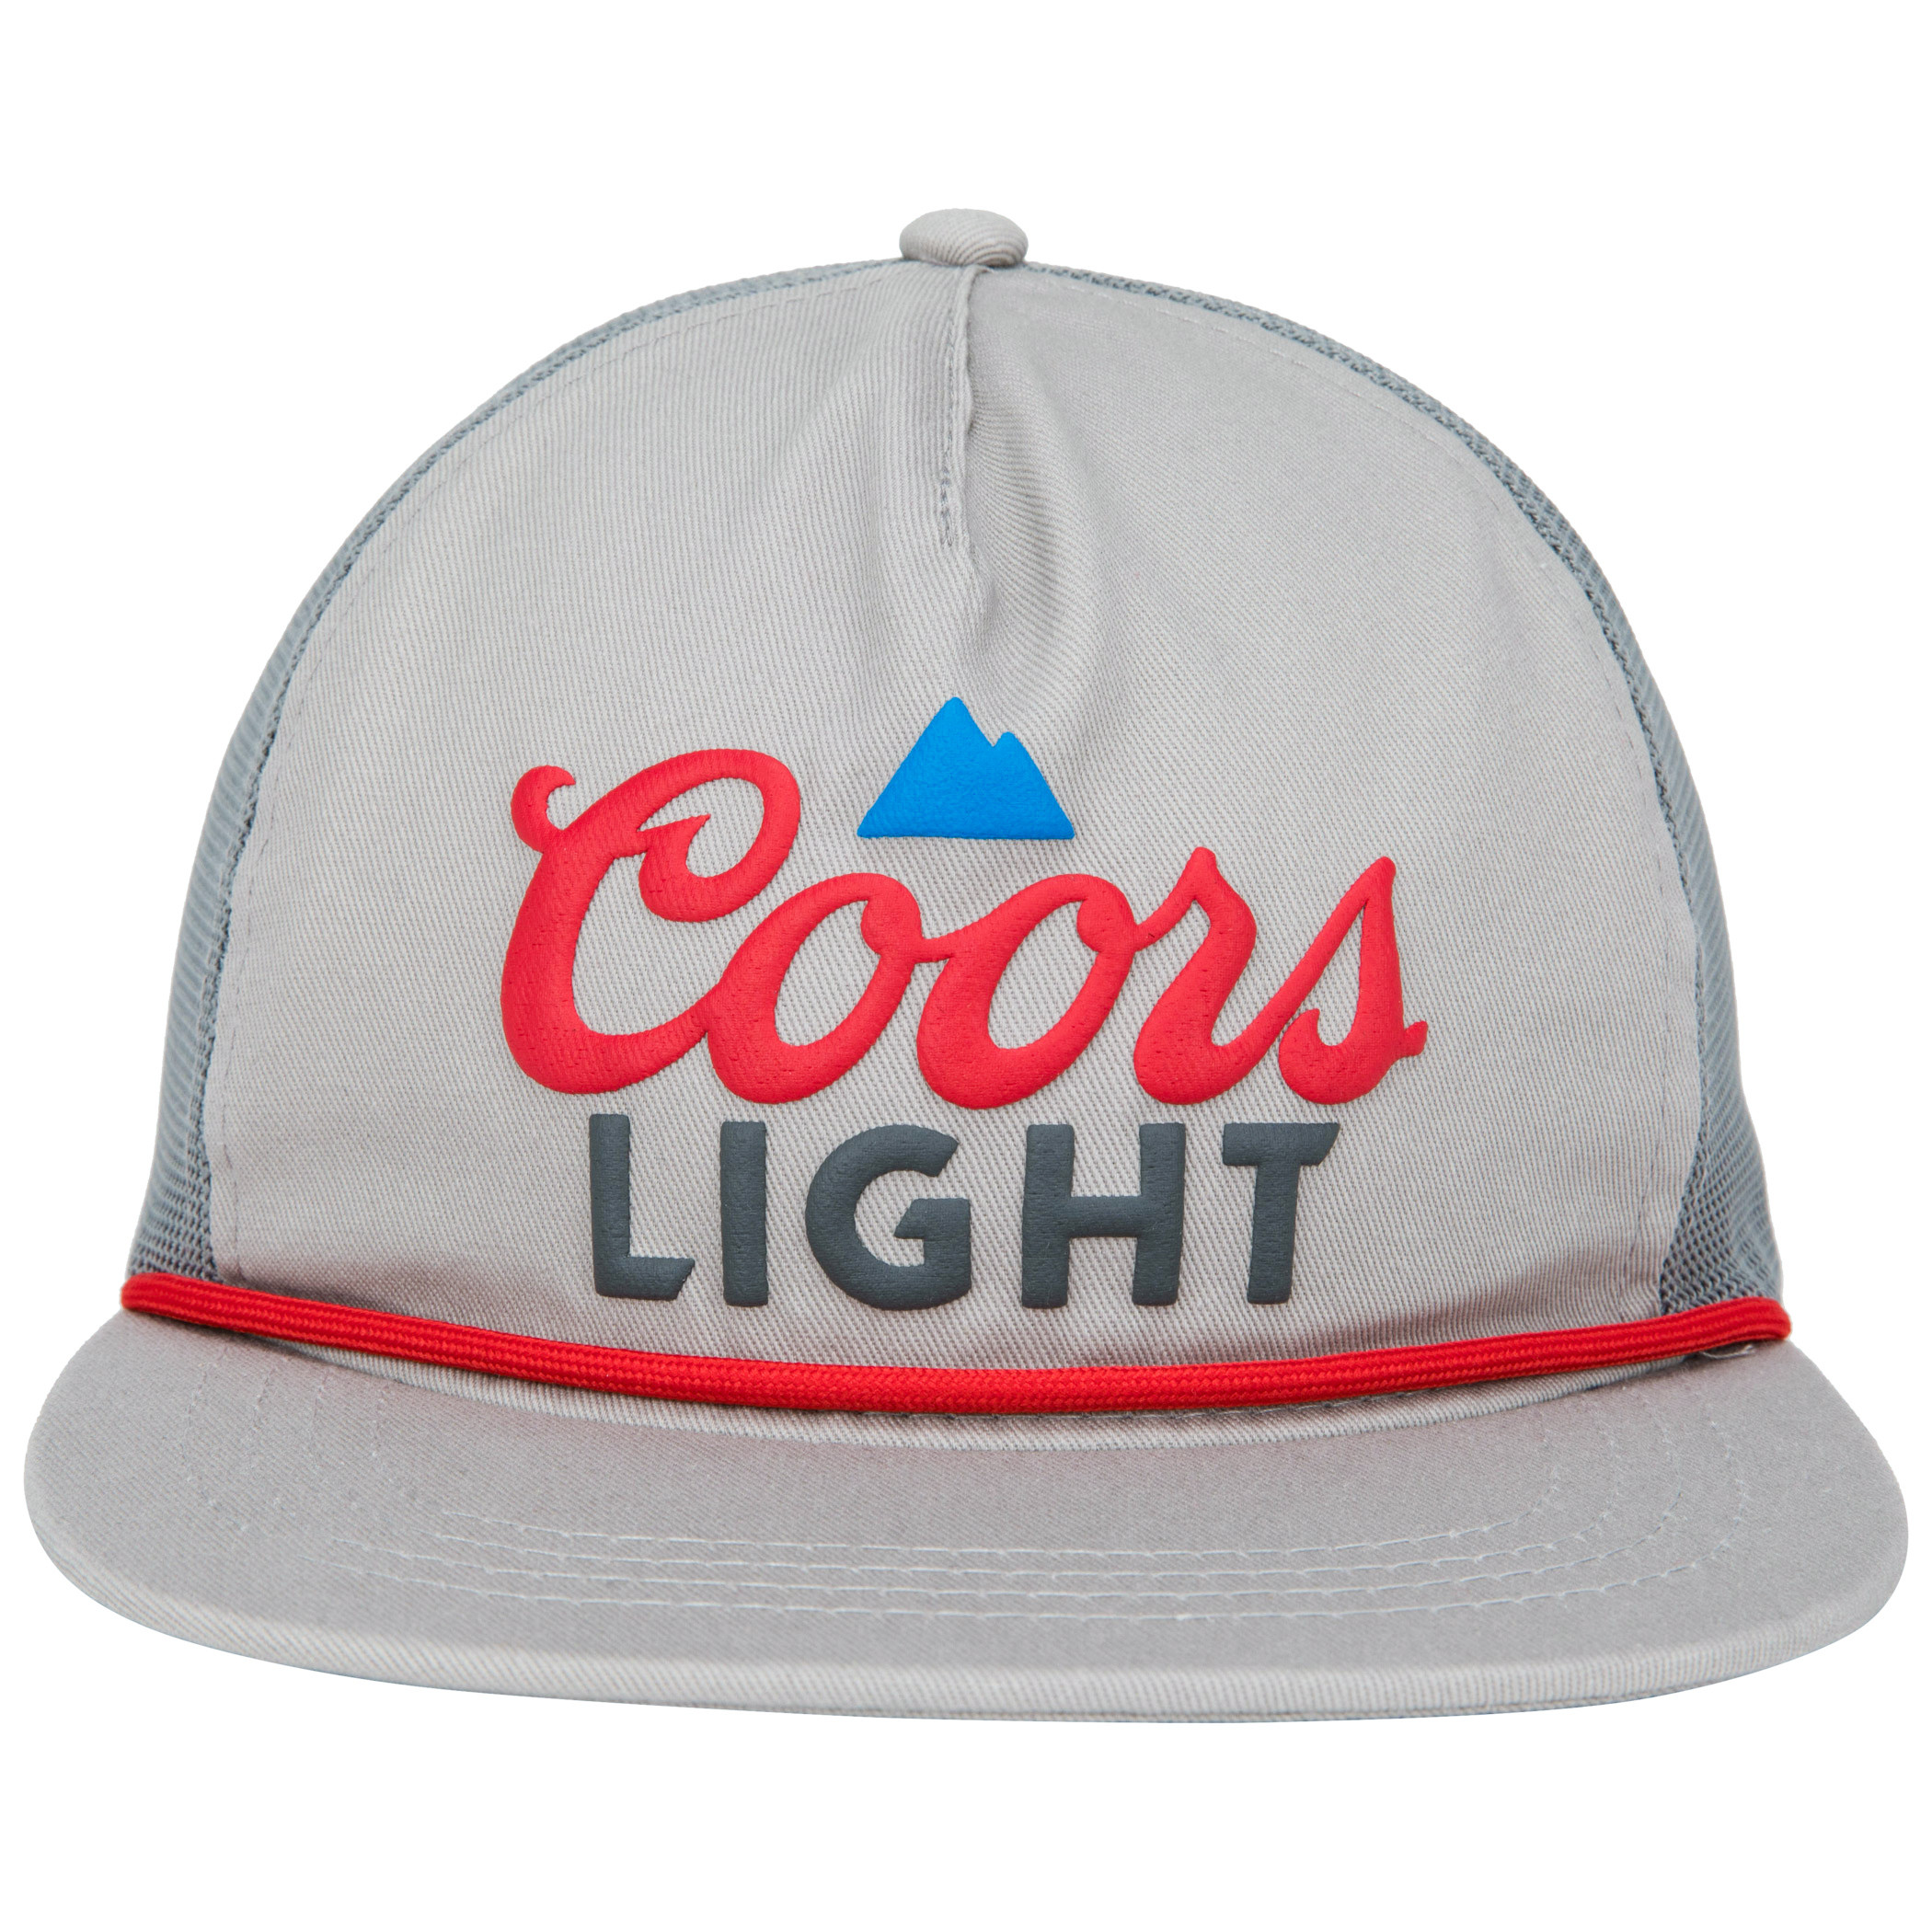 Coors Light 5 Panel Grey Colorway Rope Hat